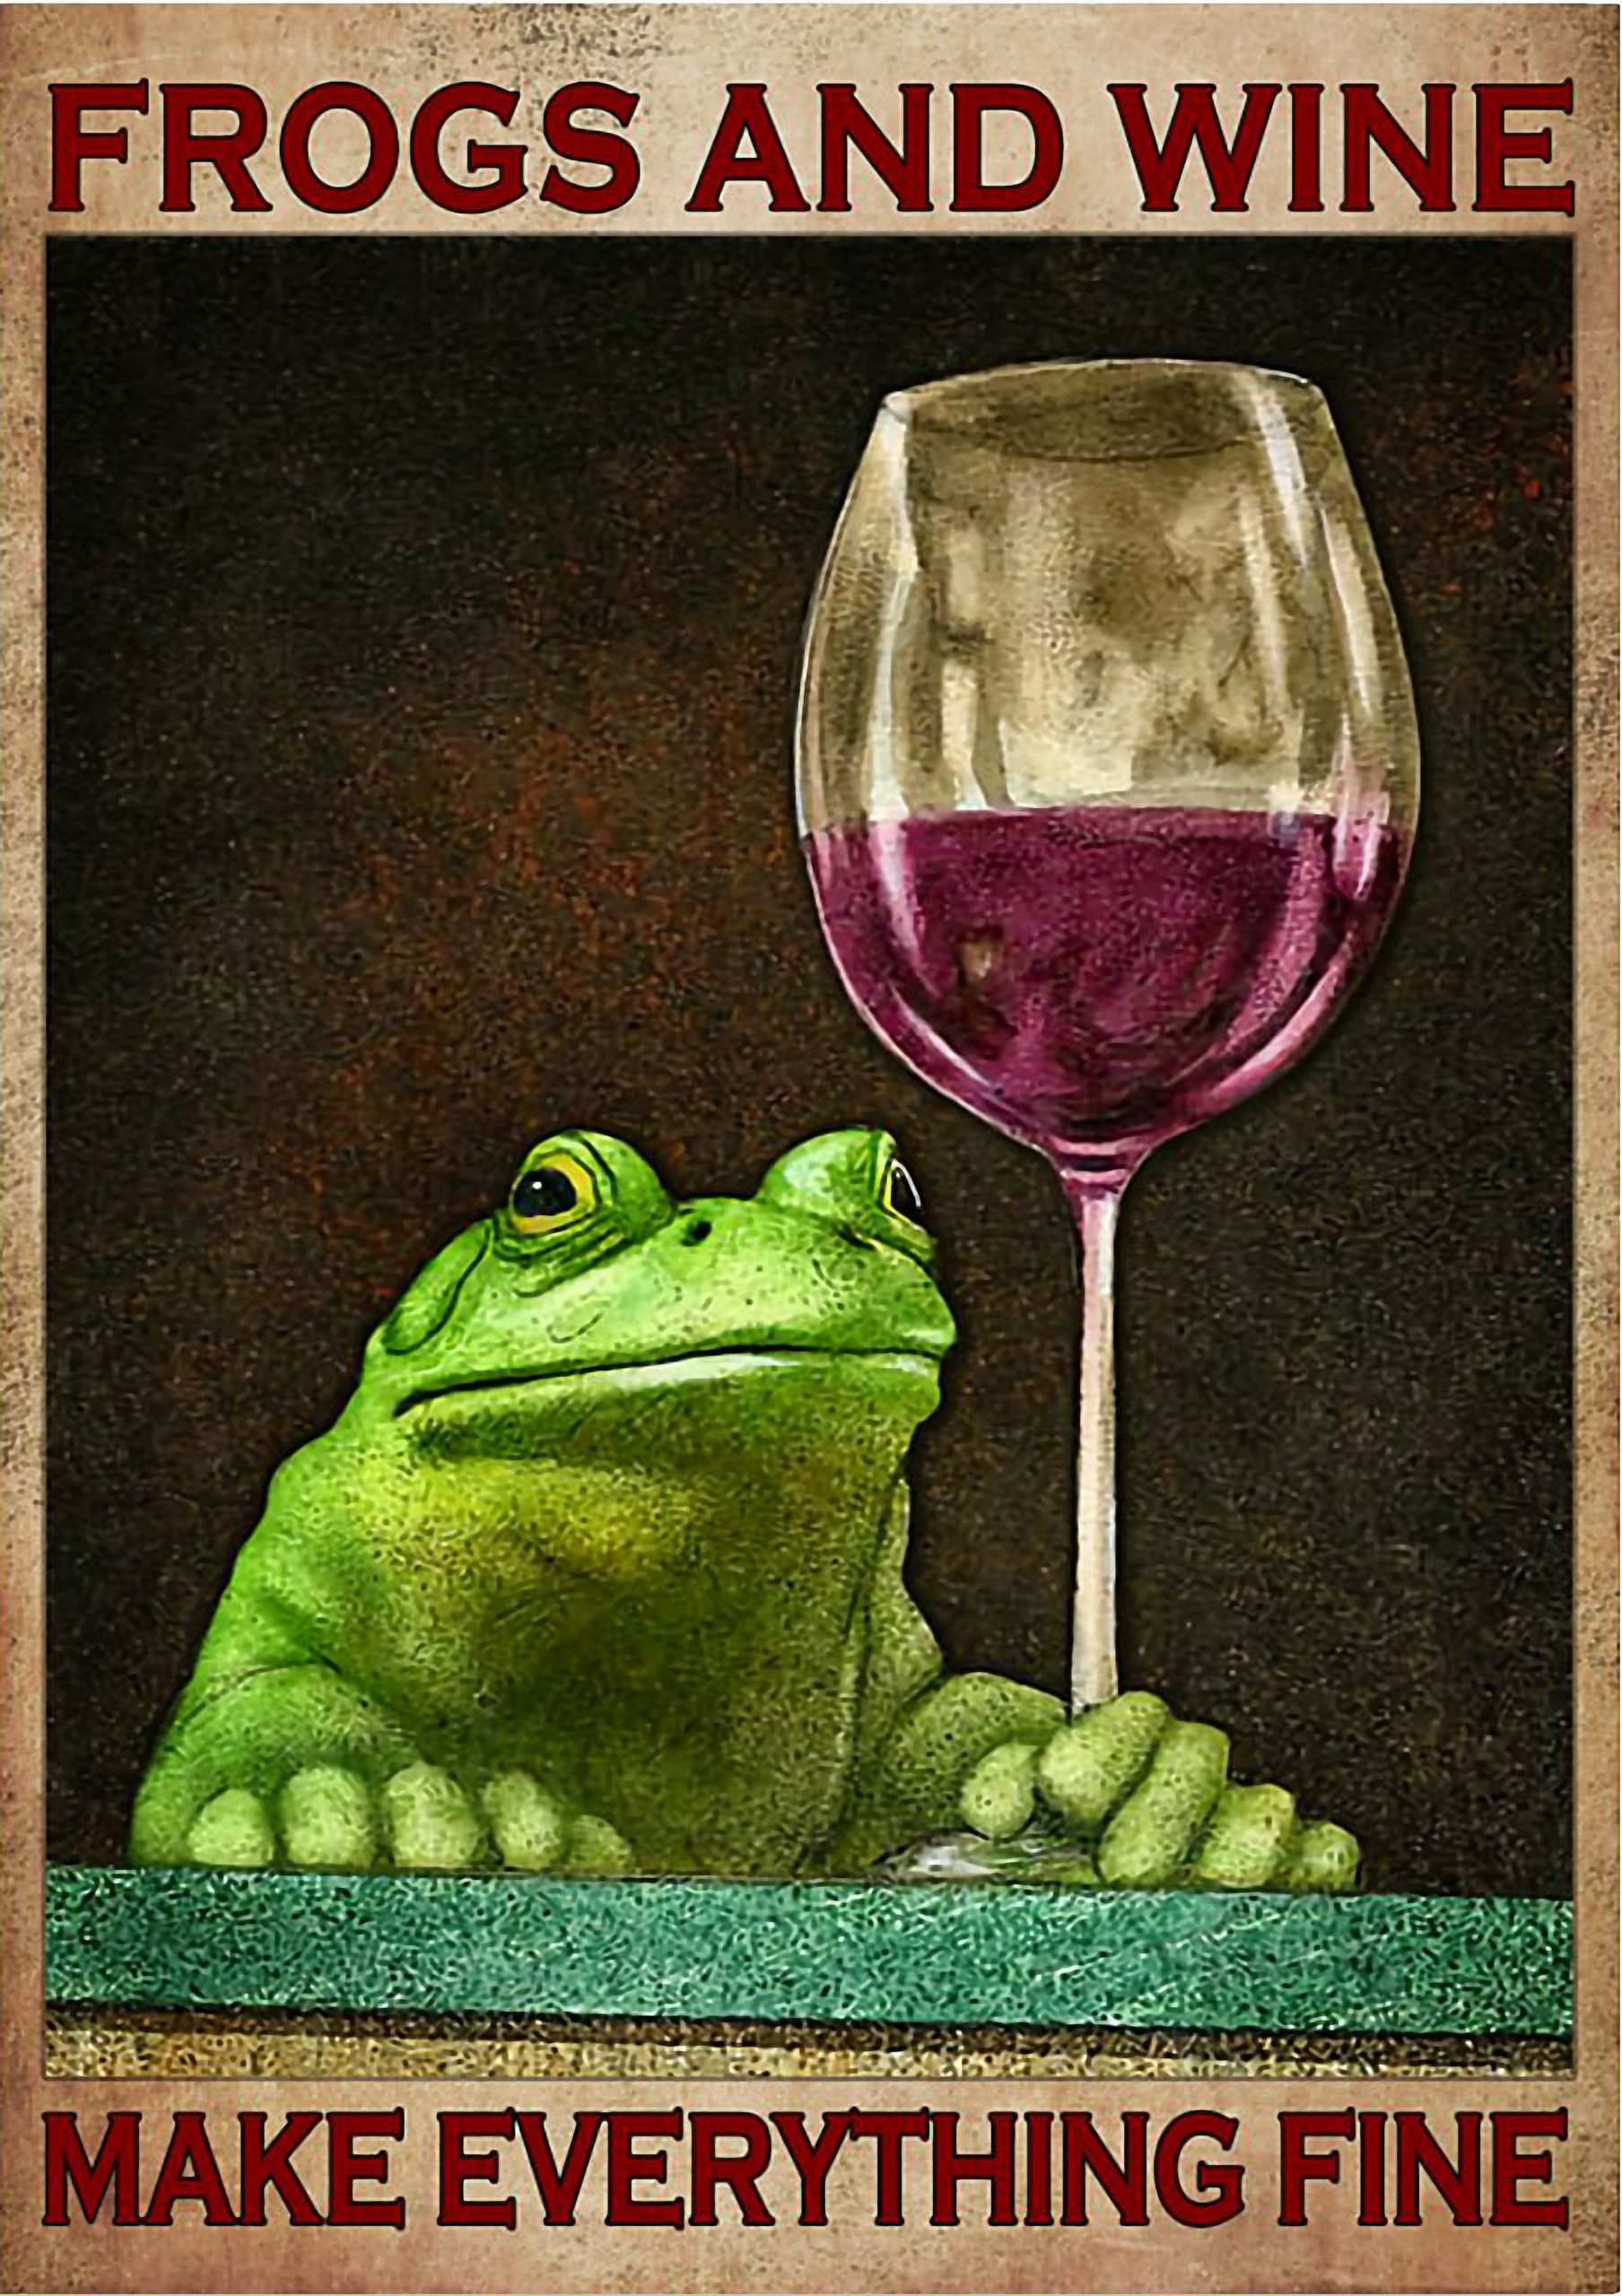 Frogs and wine Make everything fine poster